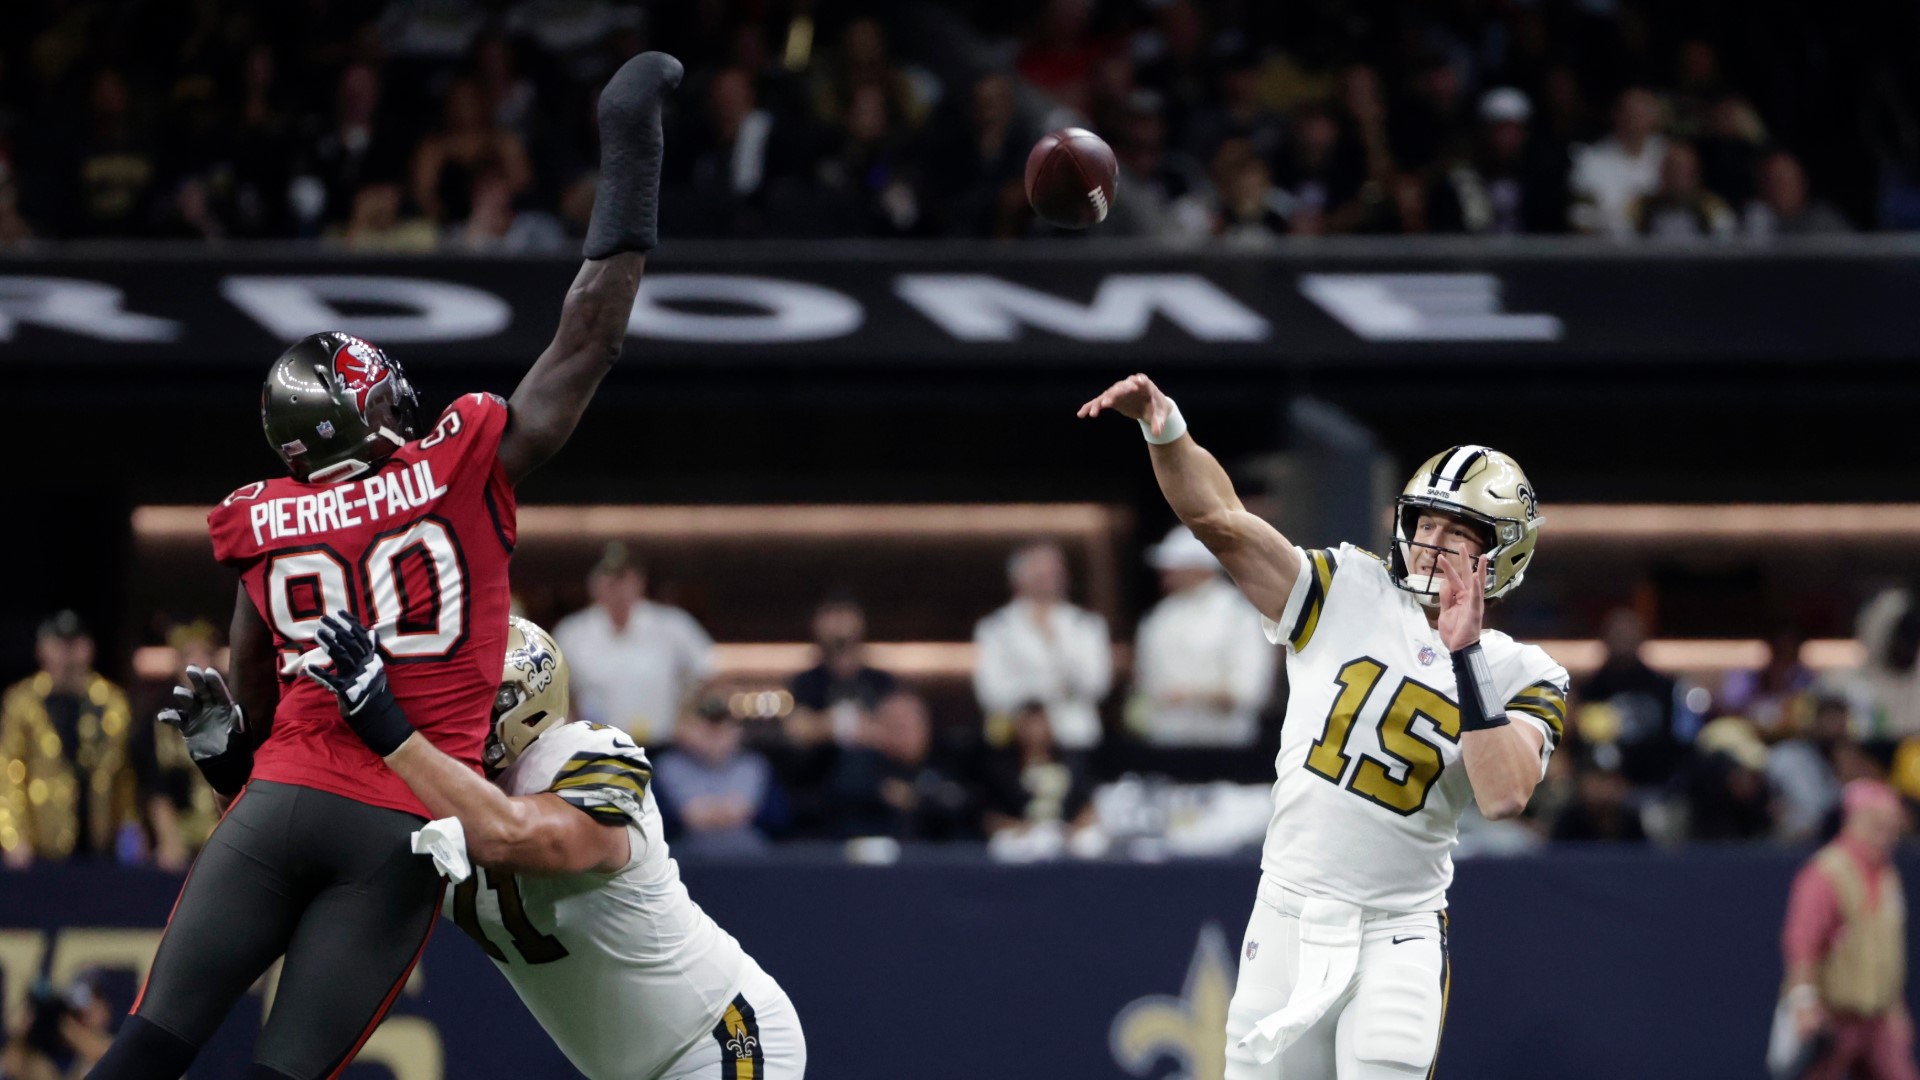 The Saints held off the defending Super Bowl Champion Tampa Bay Bucs for a 36-27 win in the Caesars Superdome.